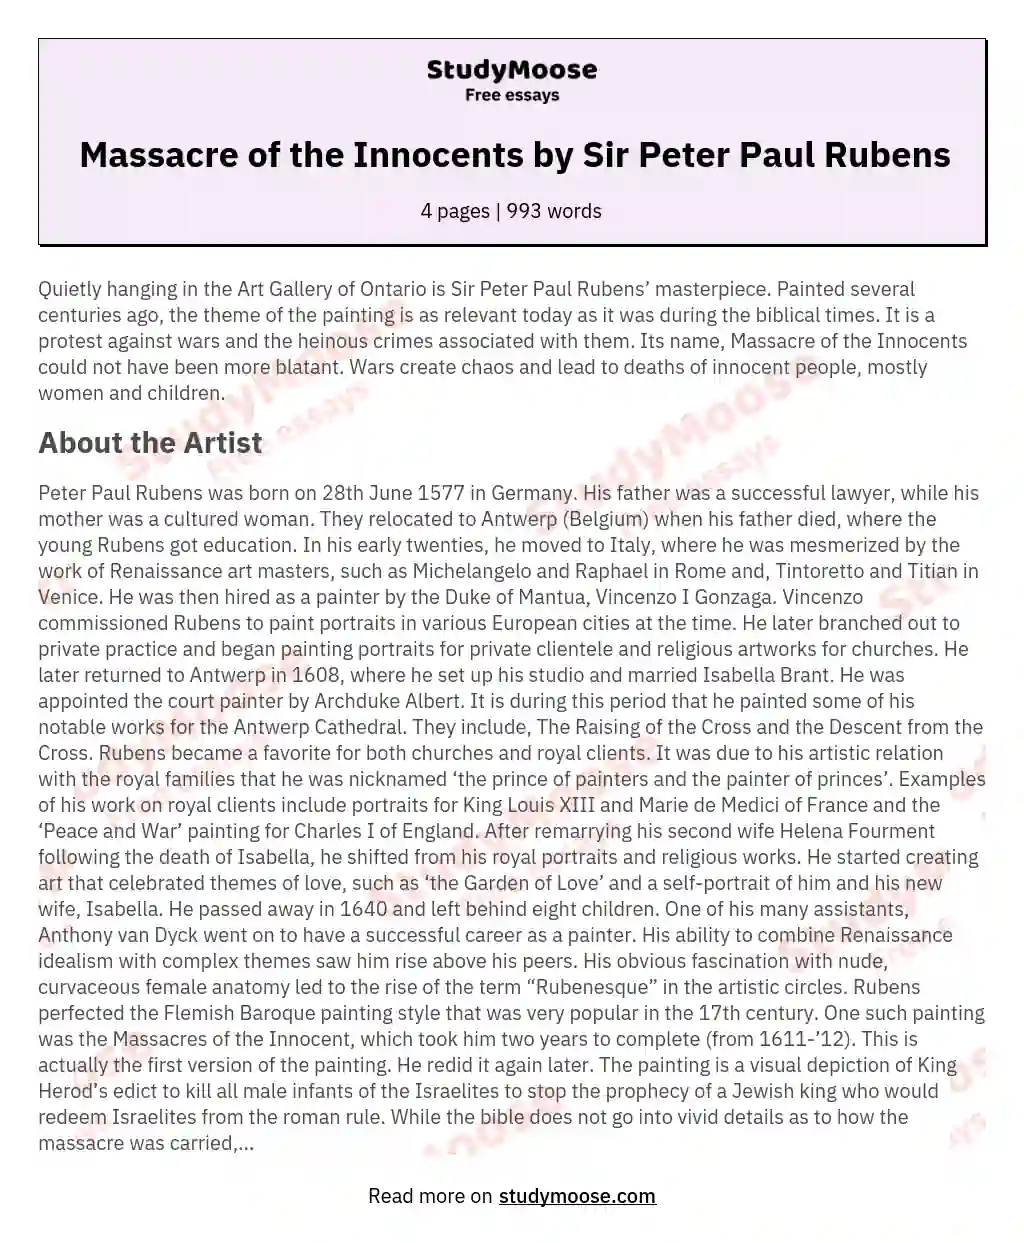 Massacre of the Innocents by Sir Peter Paul Rubens essay